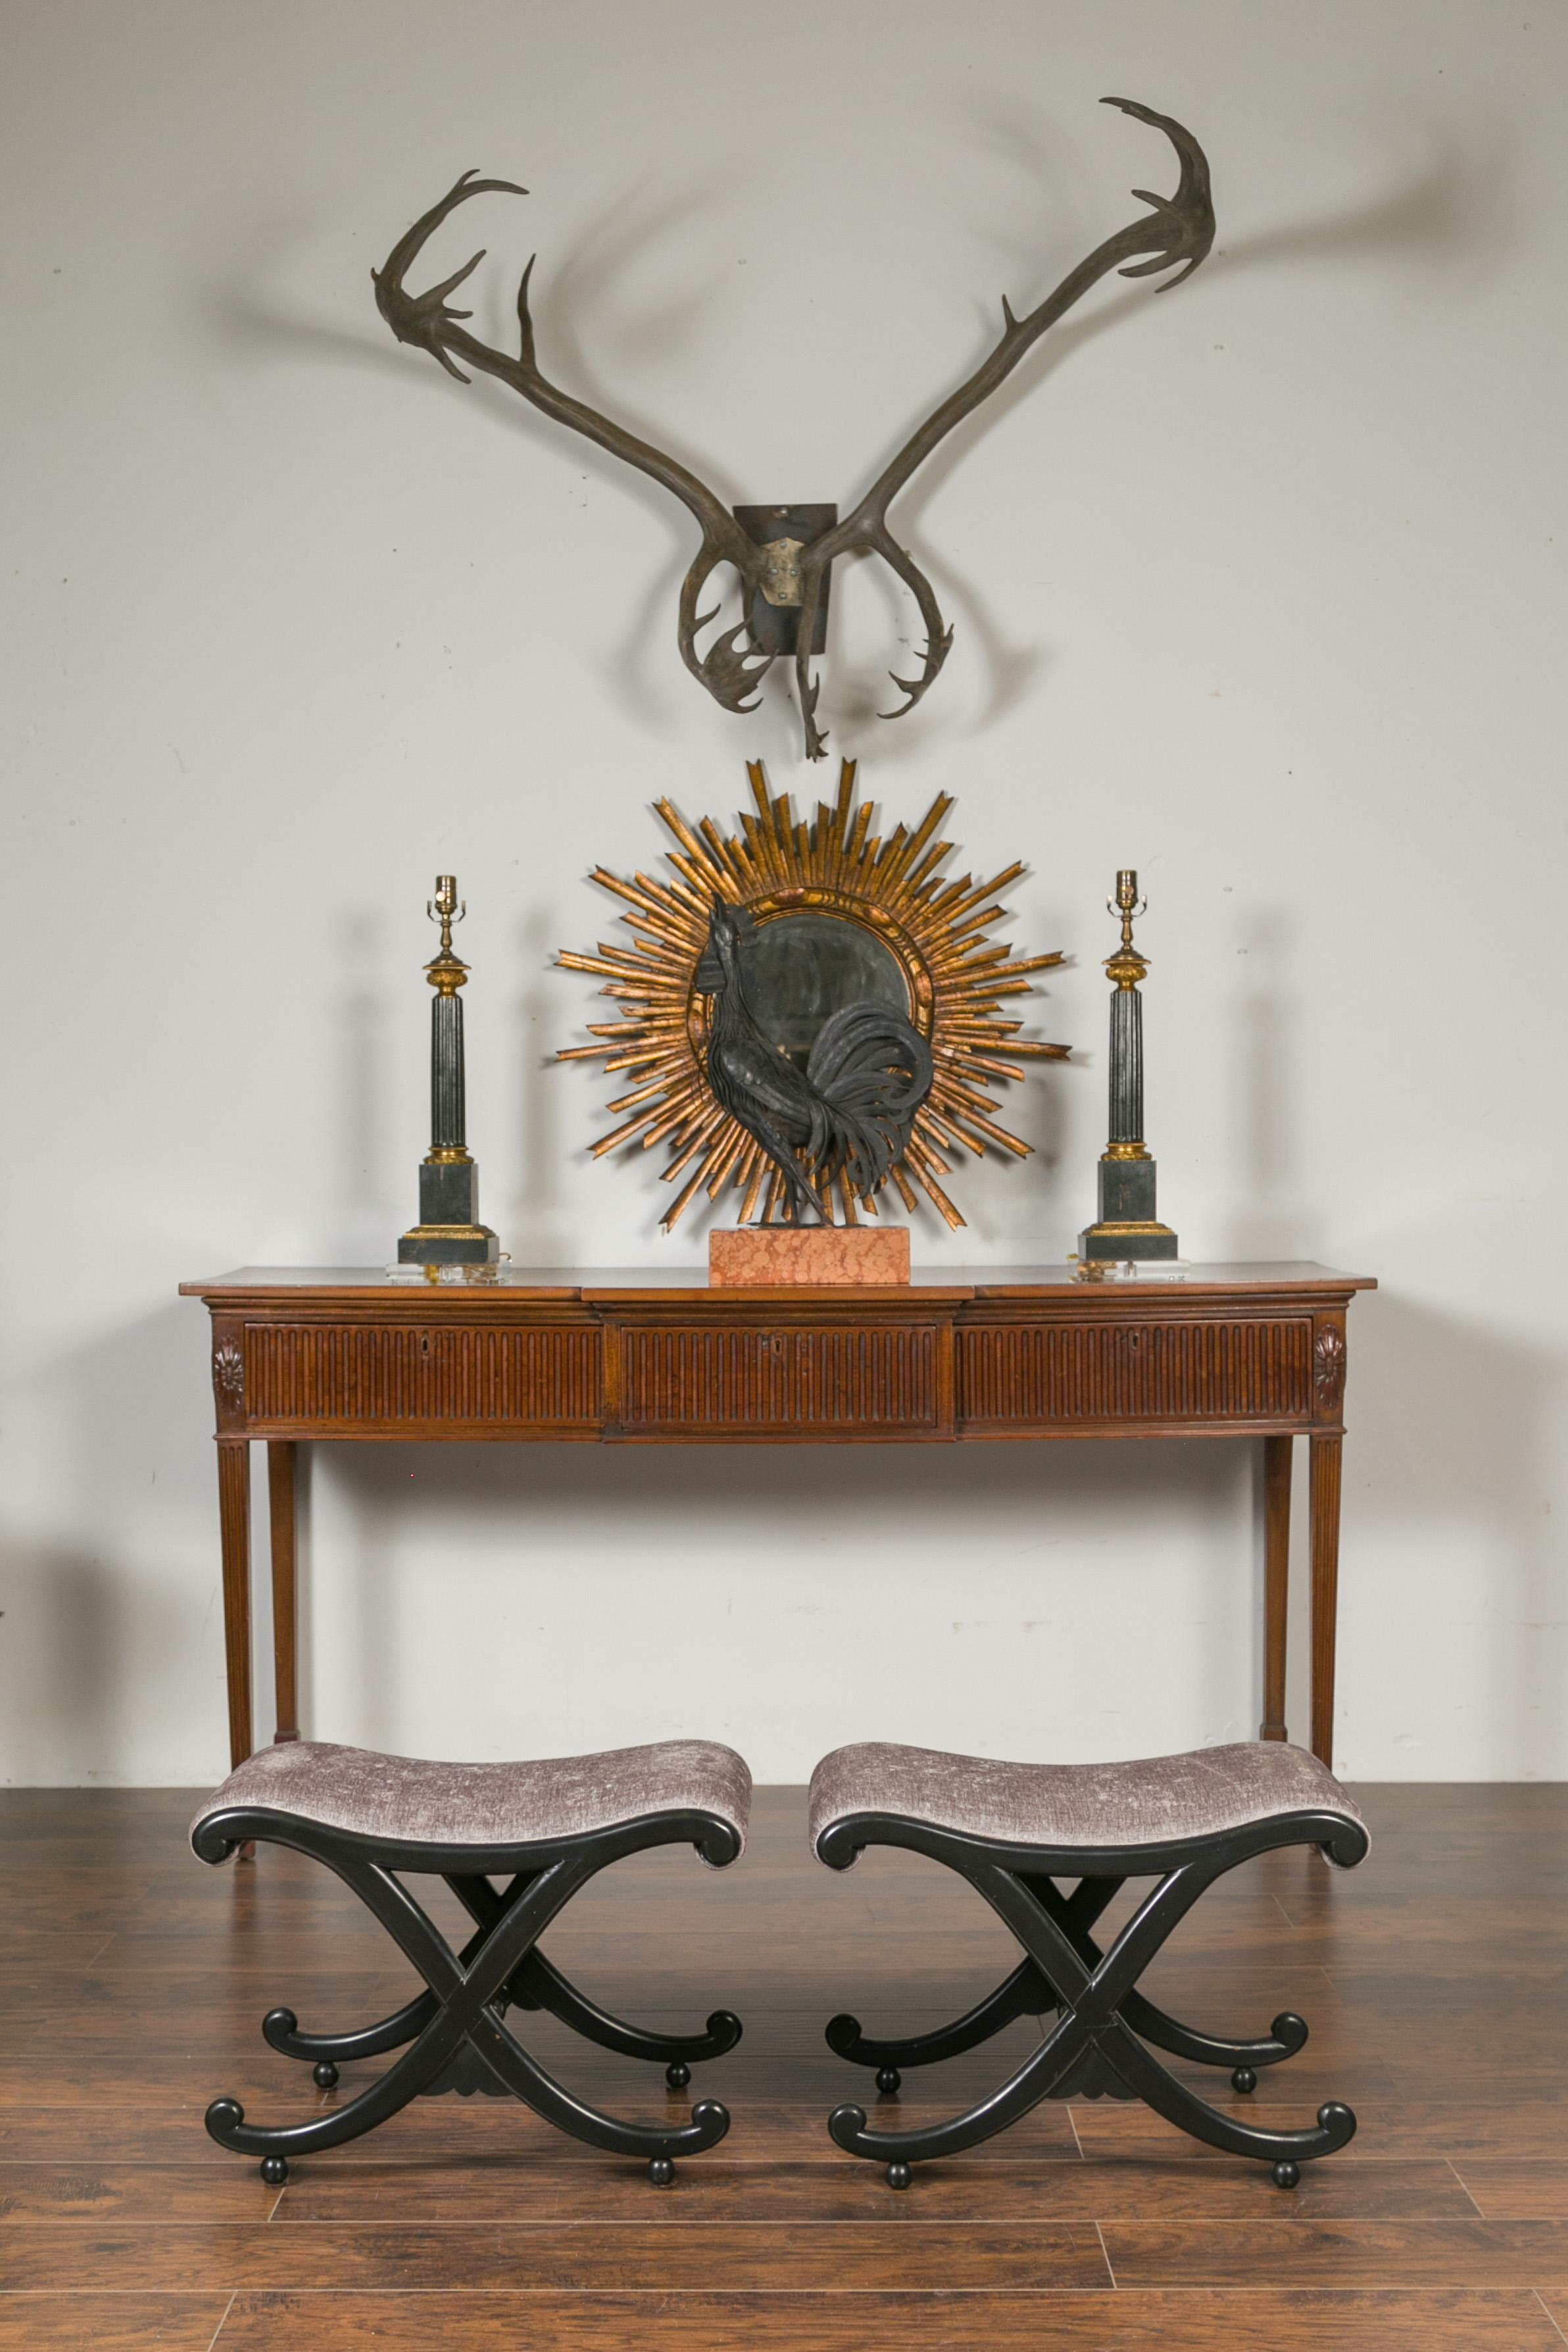 A pair of Italian vintage ebonized wood stools from the mid-20th century, with X-form base and upholstered seats. Born in Italy during the midcentury period, each of this pair of stools features a curving top covered with a grey colored upholstery,